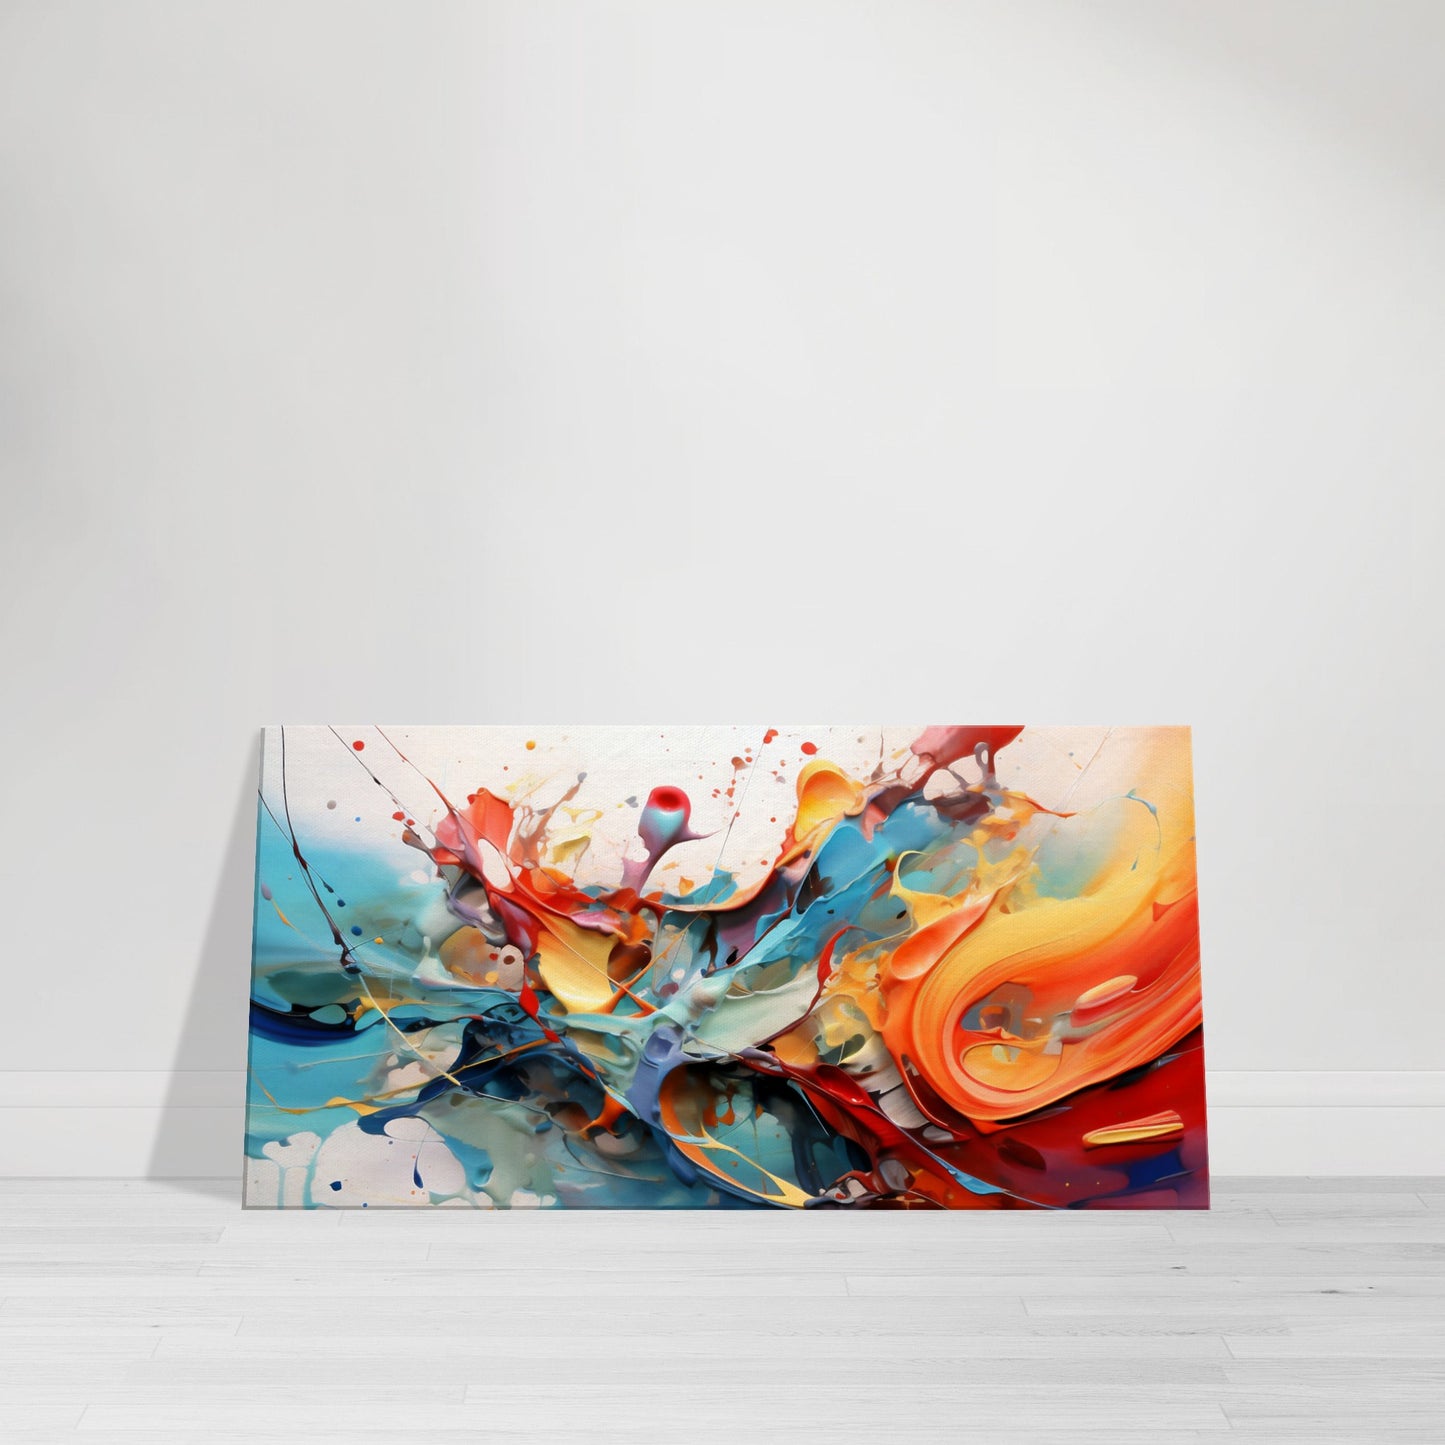 Abstract Color Splash Canvas Print | Expressive Art at Its Finest